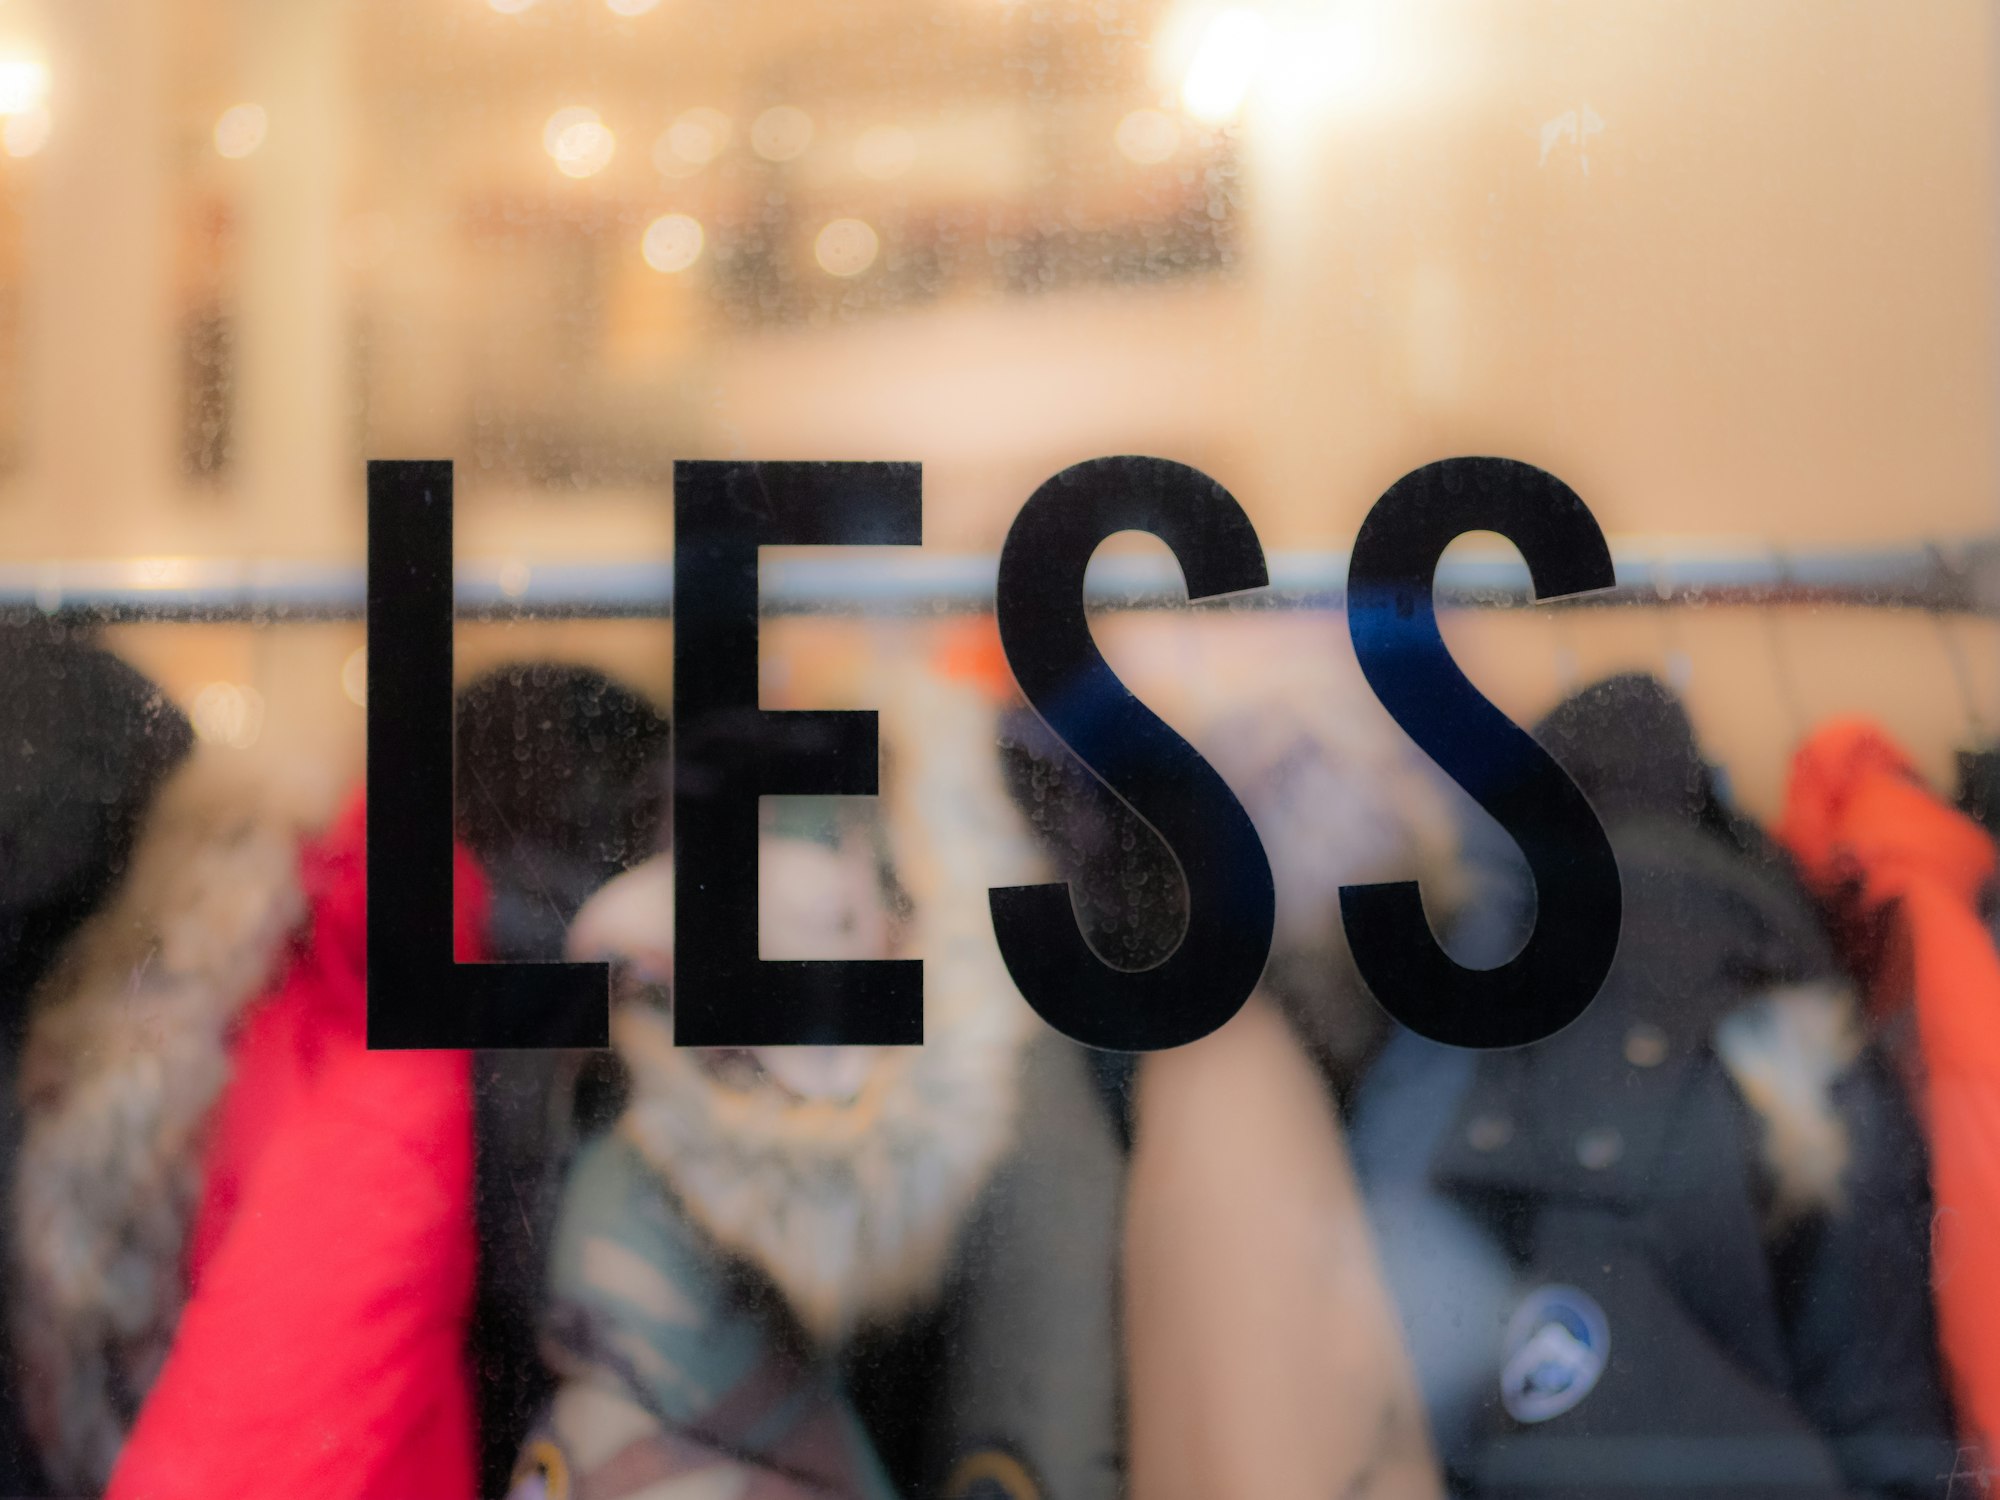 The word “less” on a window, in focus with clothes behind it. Commentary on consumerism and waste in the fashion industry. 